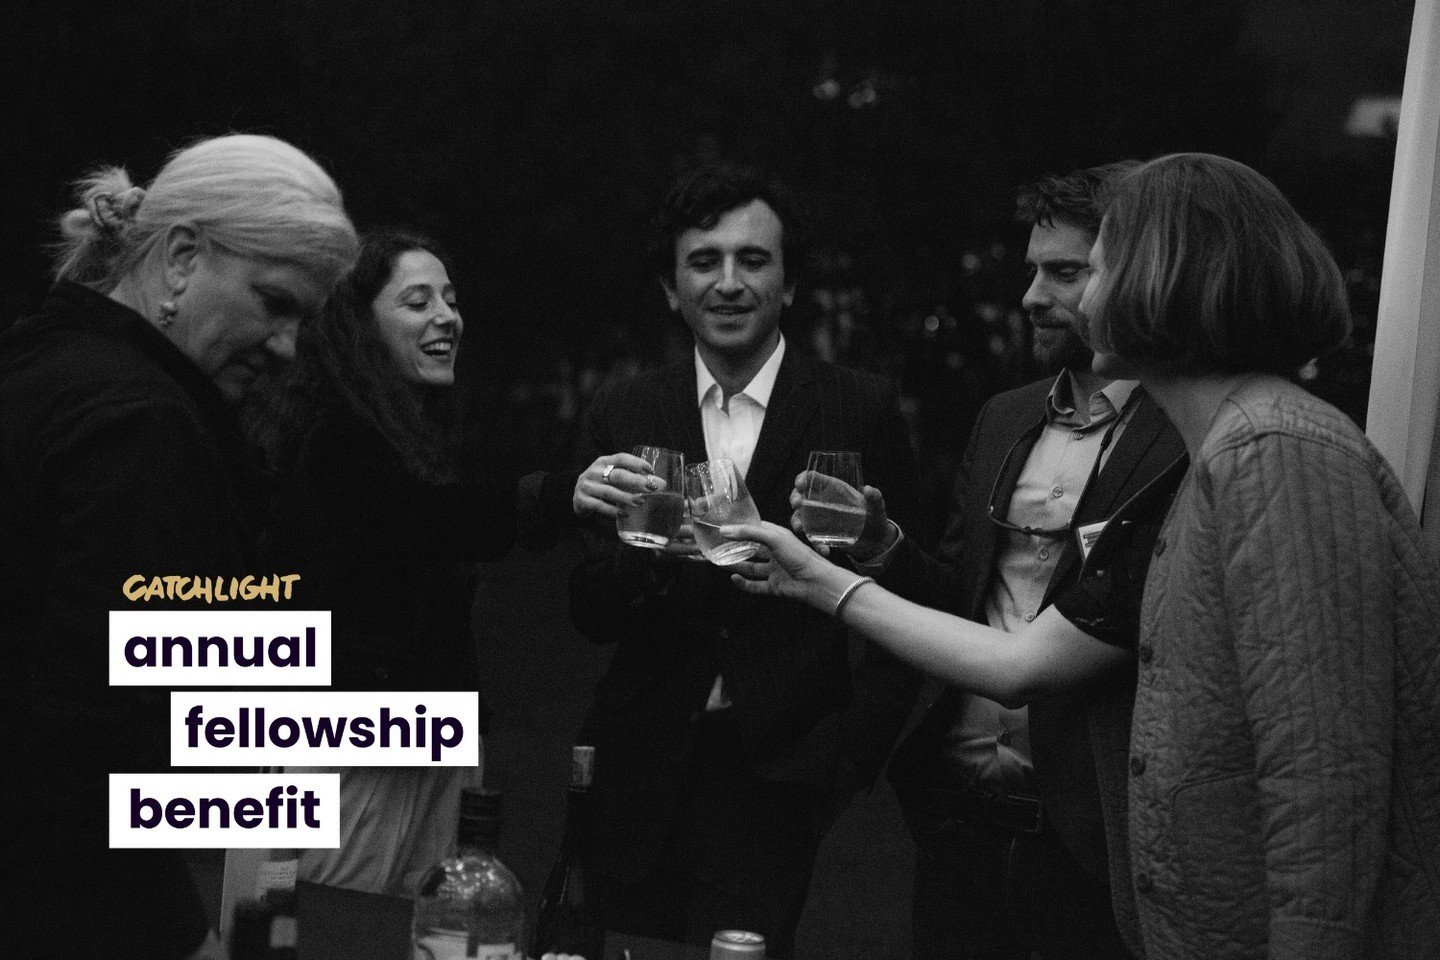 Support CatchLight programs by purchasing tickets to our annual Fellowship Benefit Gala at @kqed headquarters in San Francisco on Friday, April 26. 

Join us for cocktails and fine seasonal cuisine, make new connections at the rooftop reception, and 